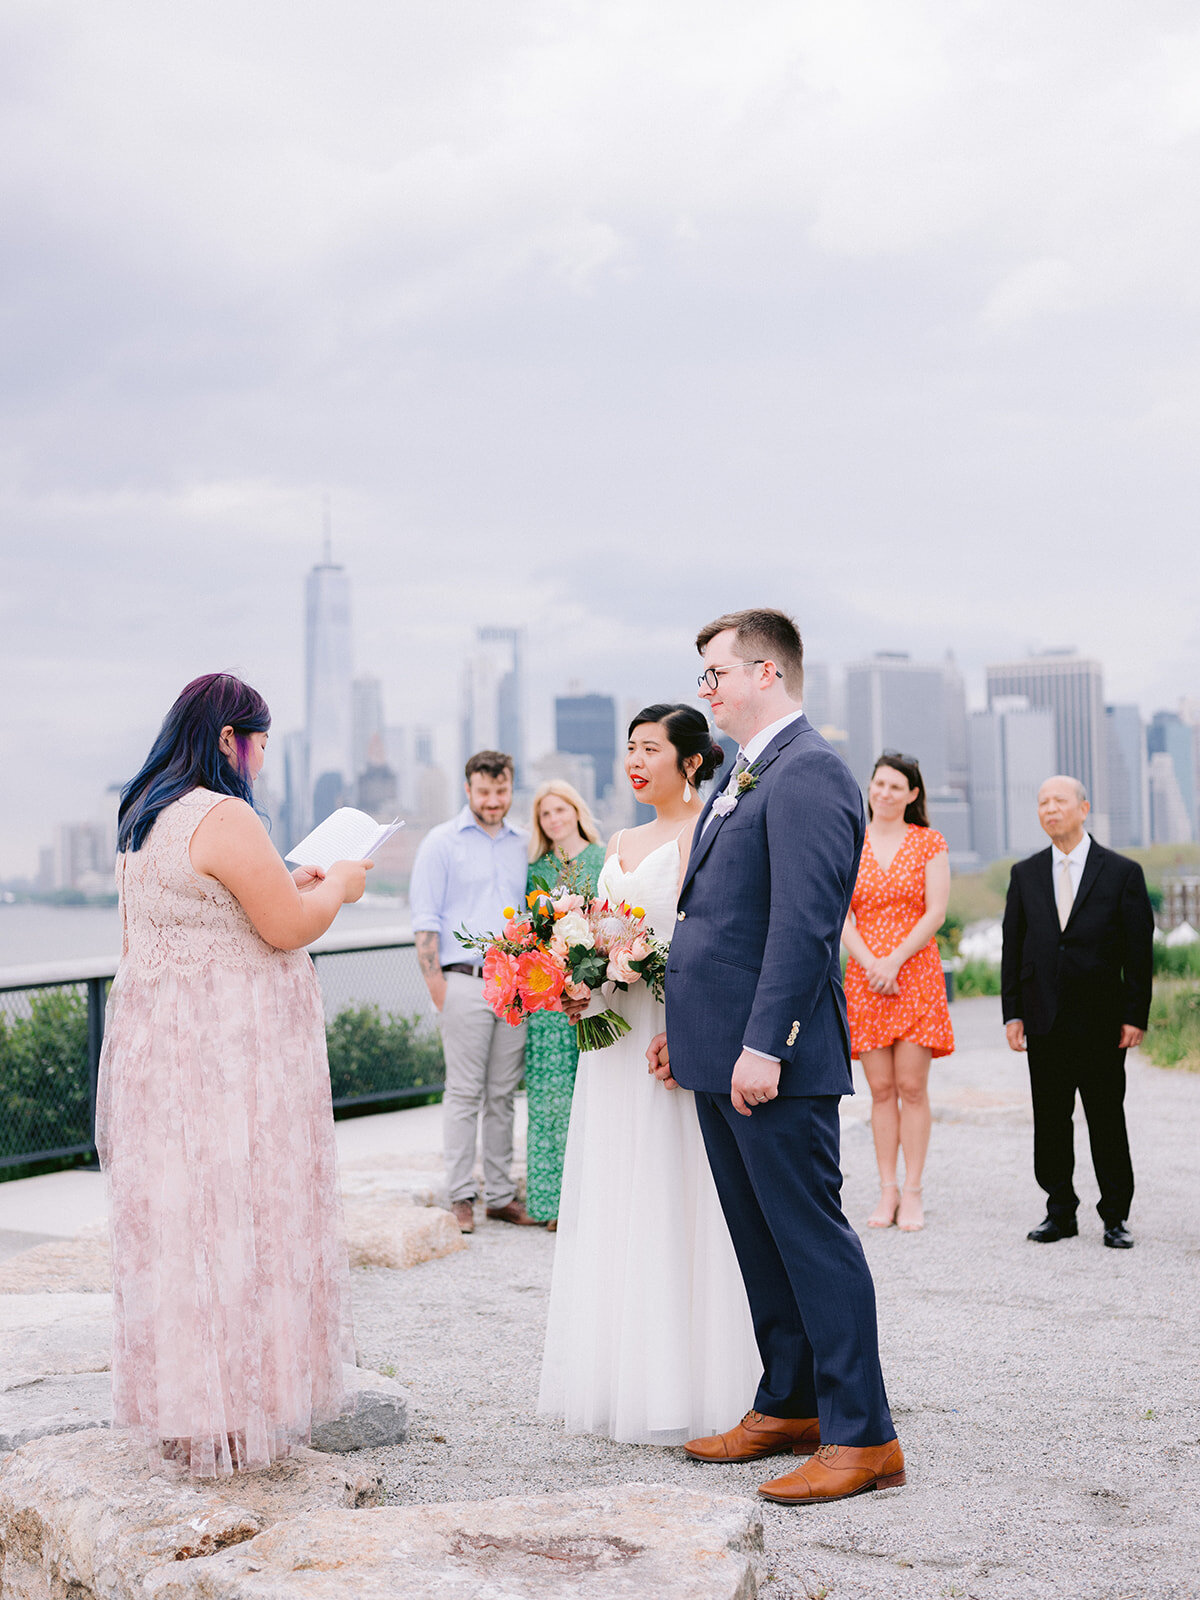 Intimate-Wedding-Ideas-in-NYC-Governors-Island-24